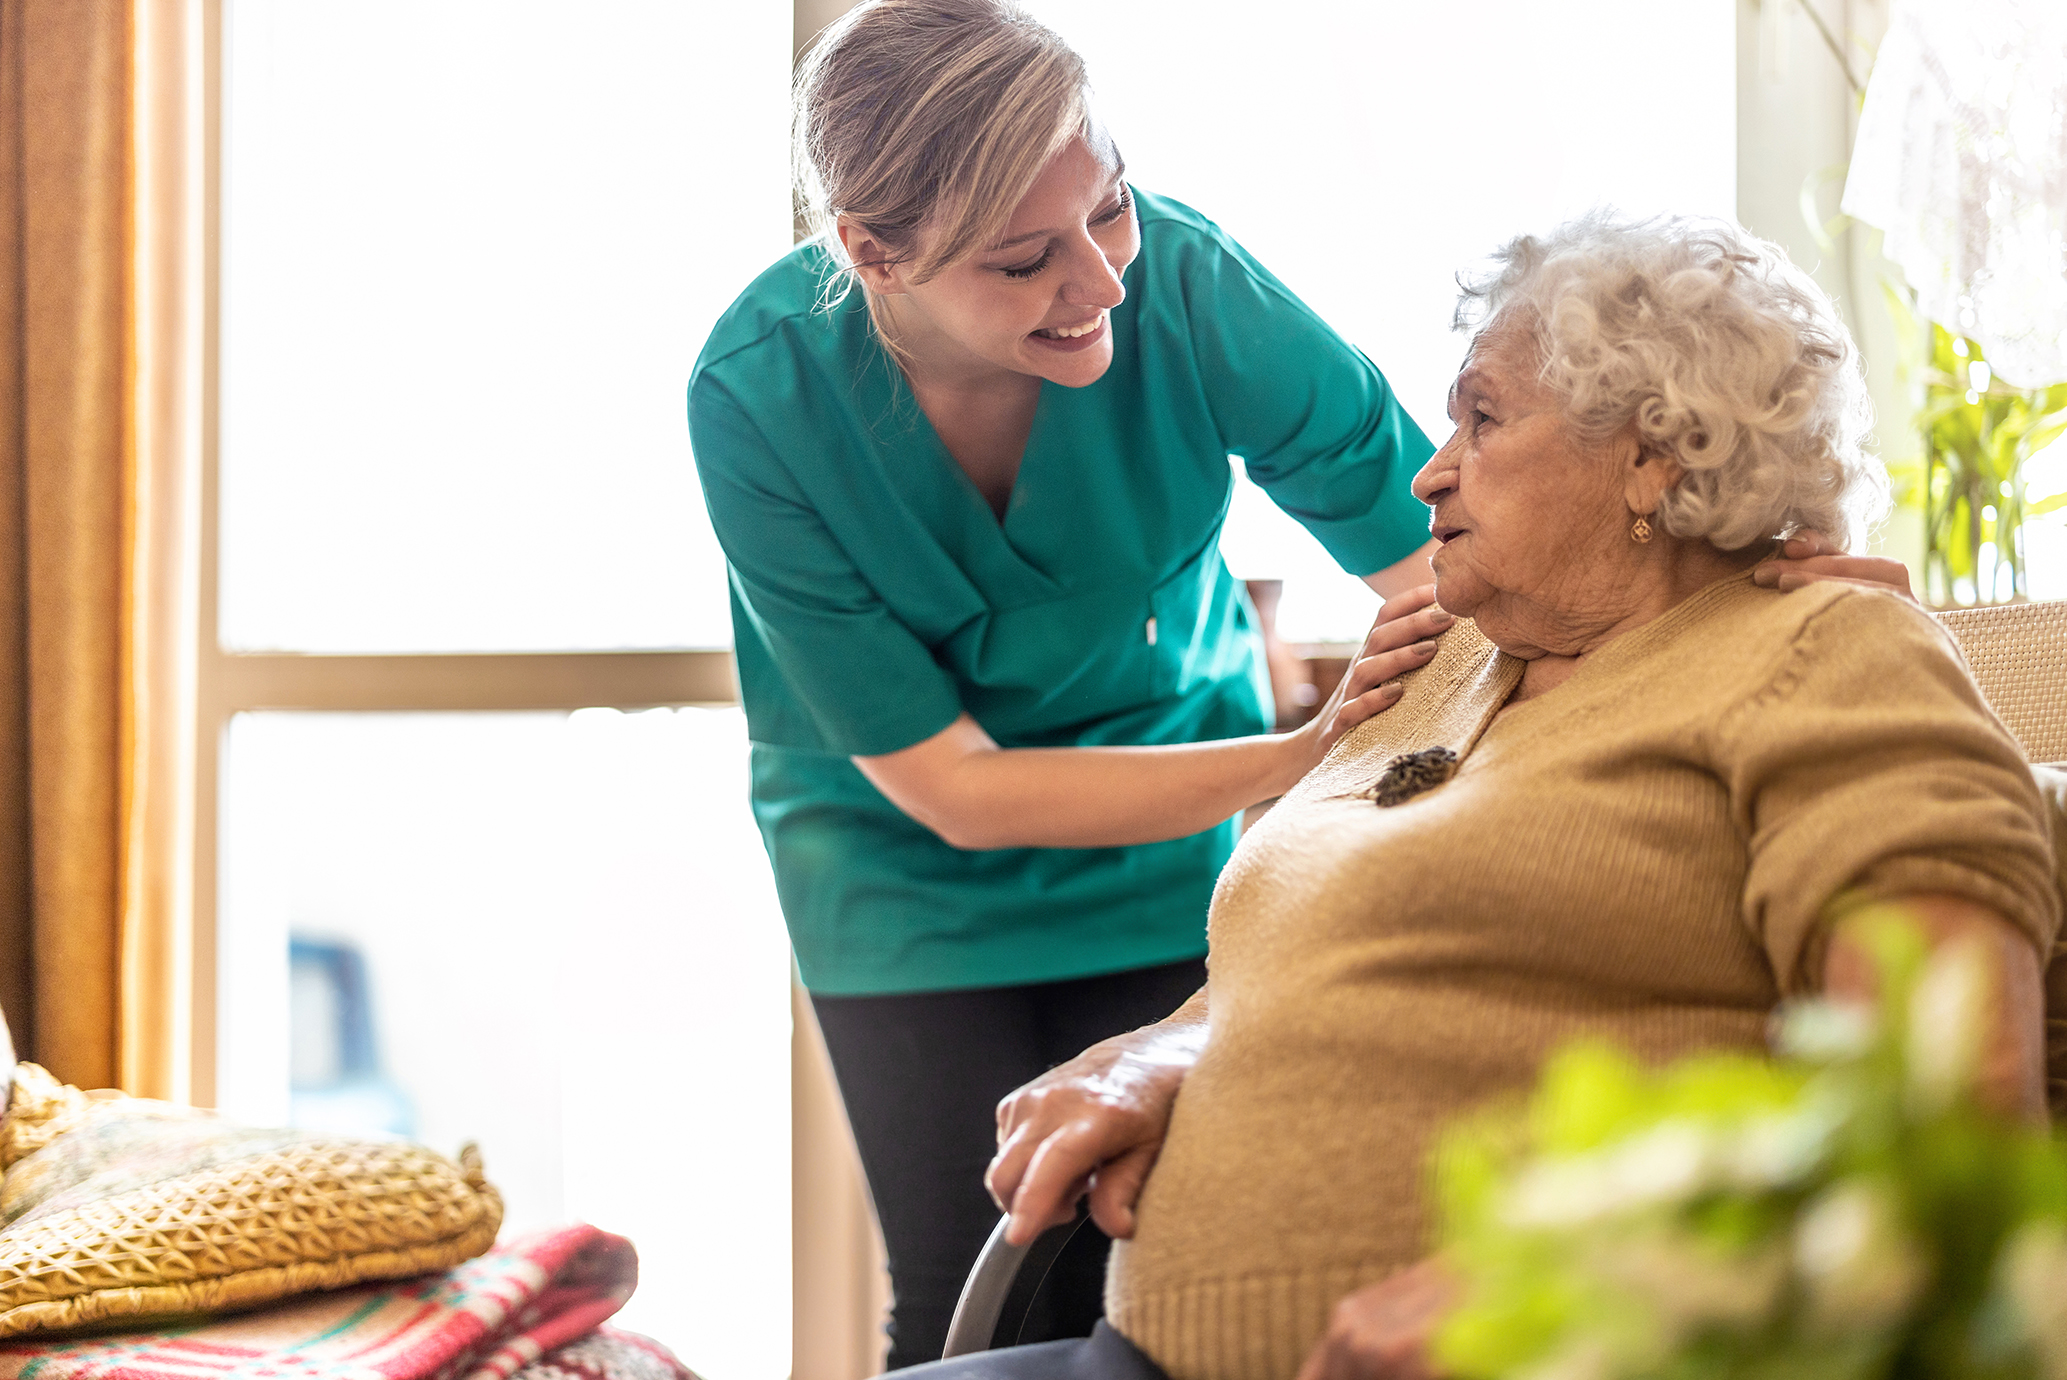 Older woman sitting getting assistance from a female healthcare worker